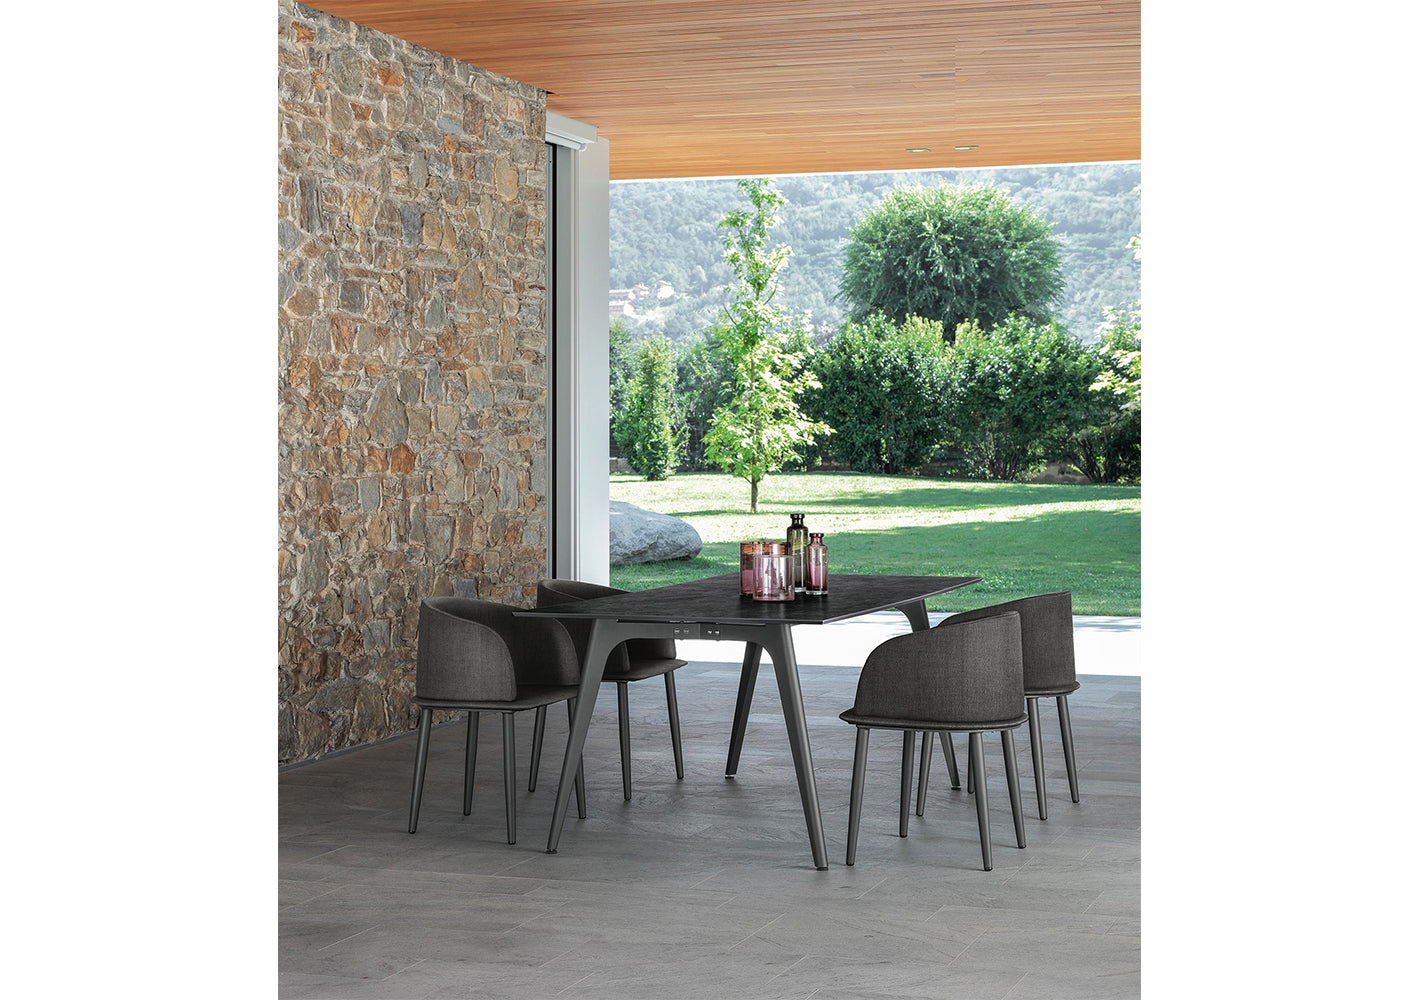 CleoSoft//Alu Square Dining Table